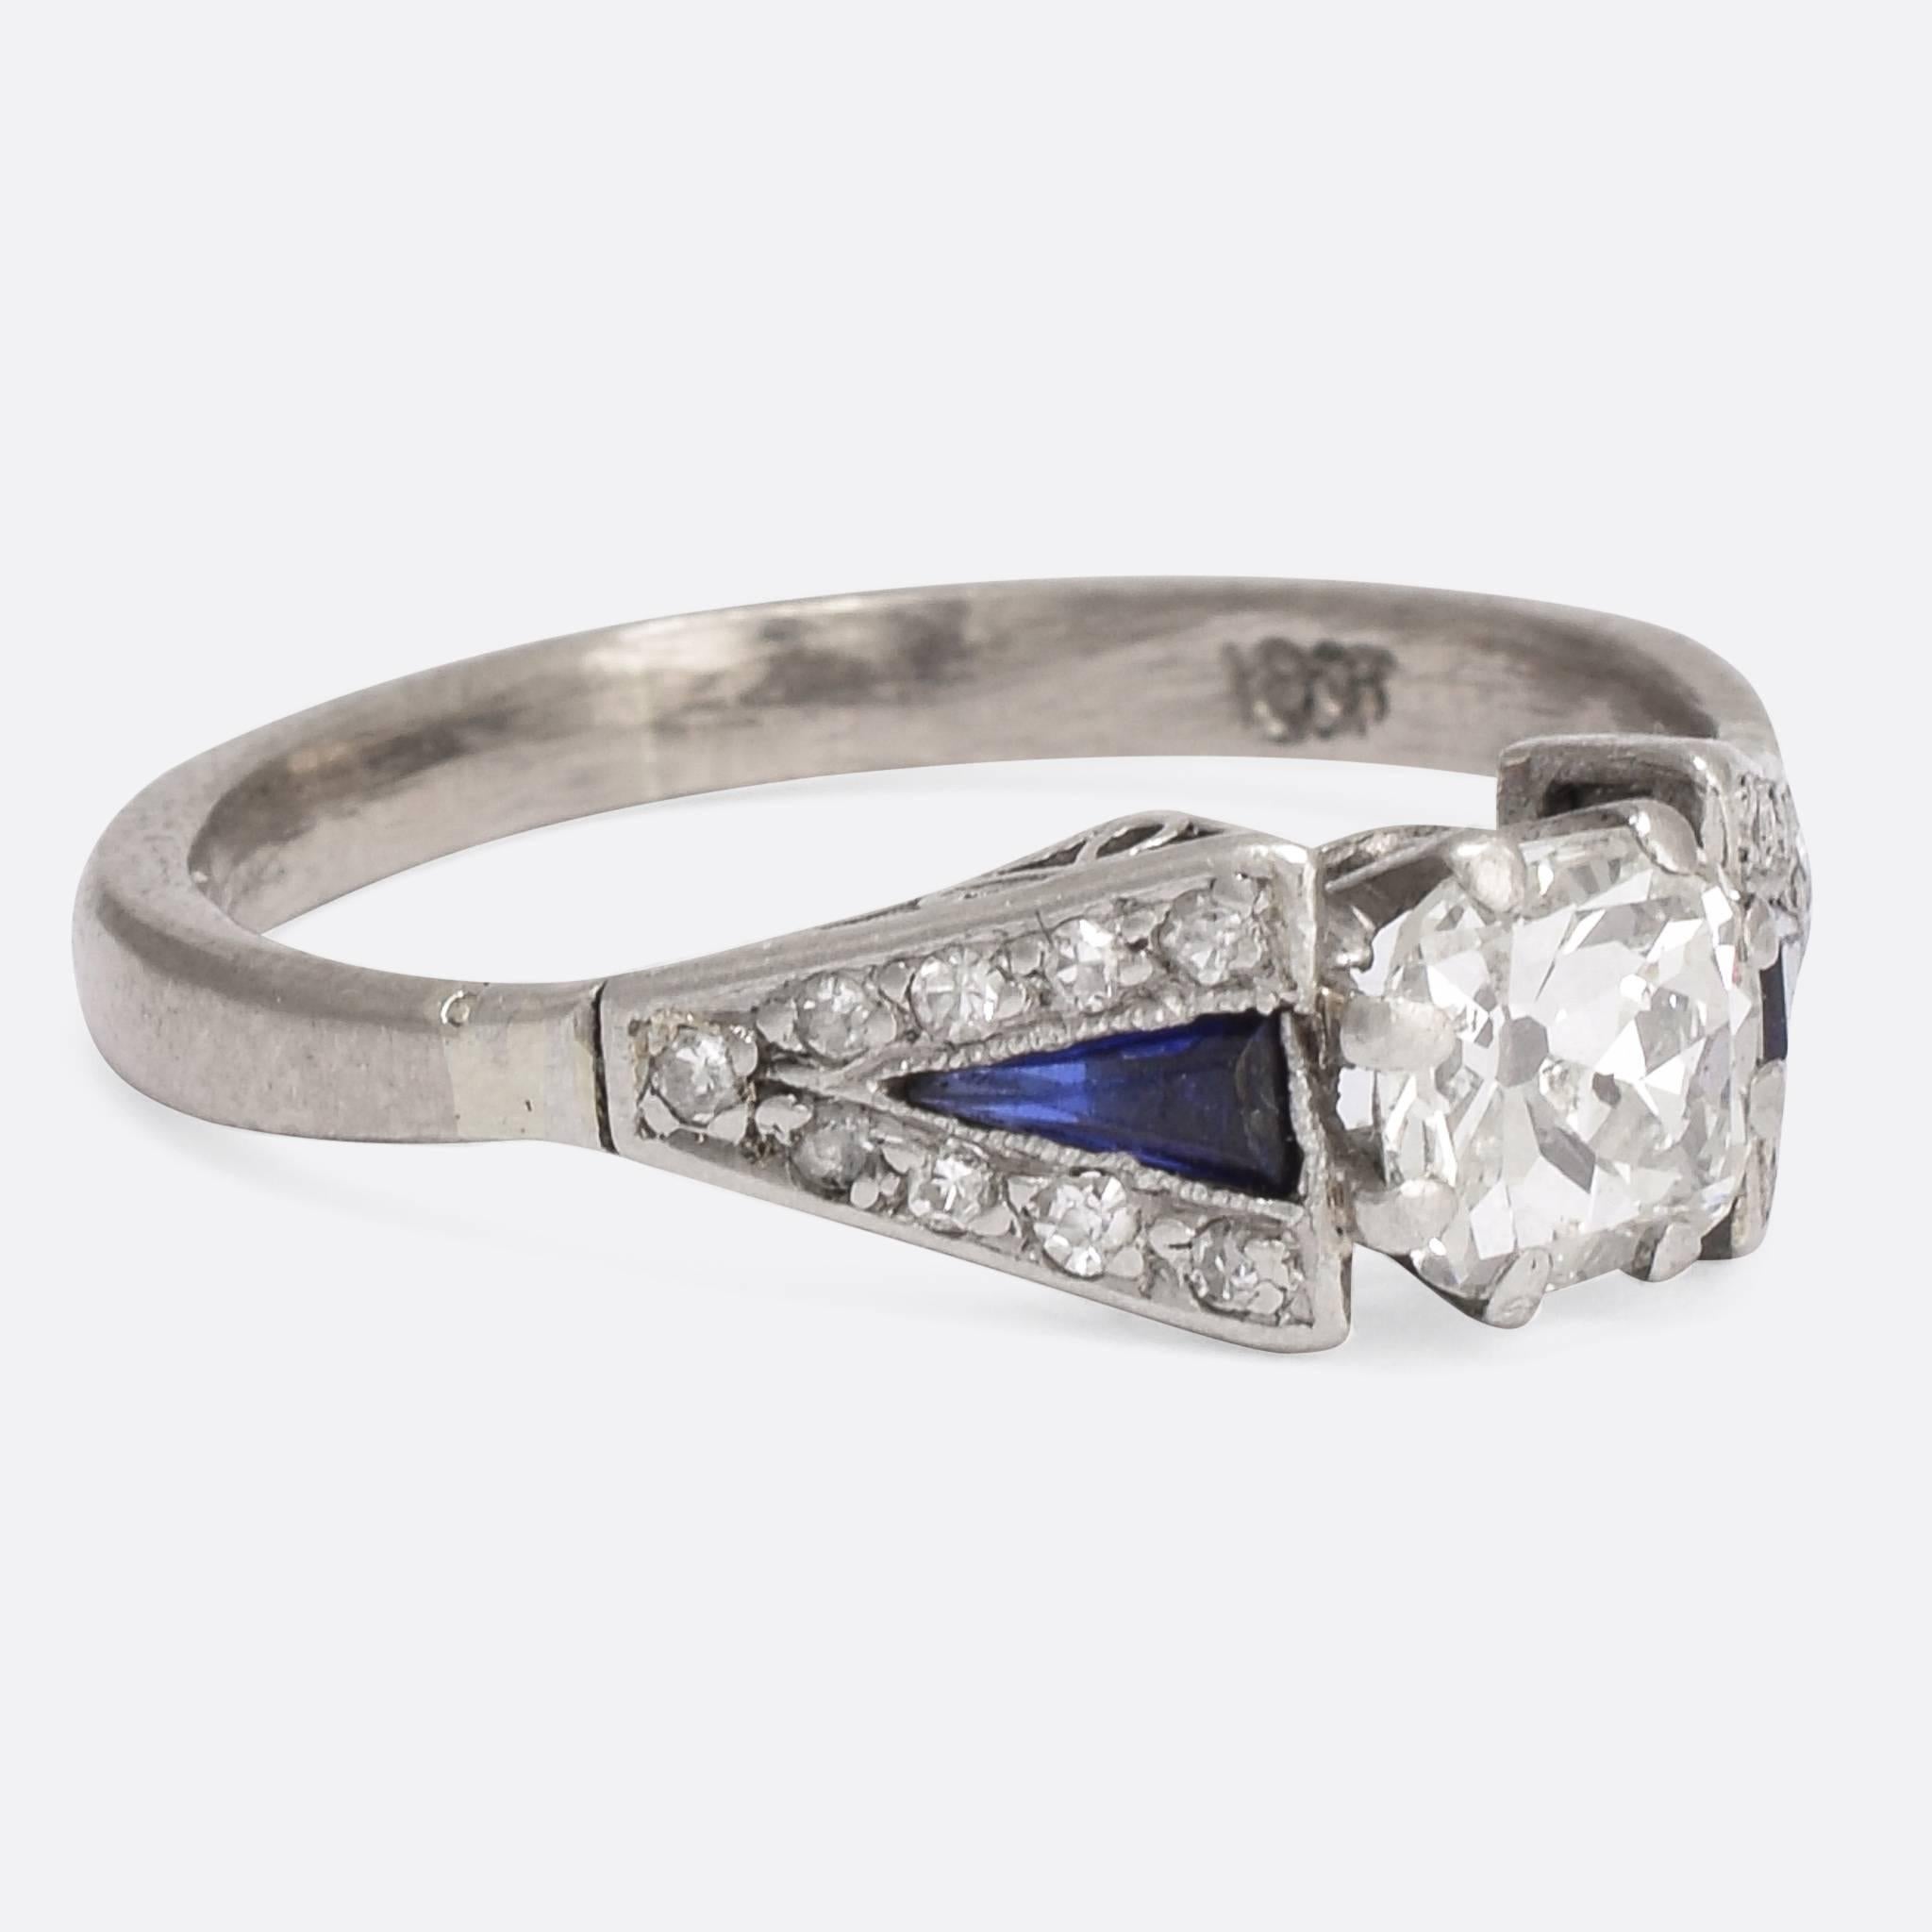 A beautiful Art Deco period Sapphire & Diamond engagement ring. The principal stone, a 60pt modified old mine cut, has most likely had it's table enlarged to add brilliance to the stone. The shoulders are set with natural calibre cut sapphires with